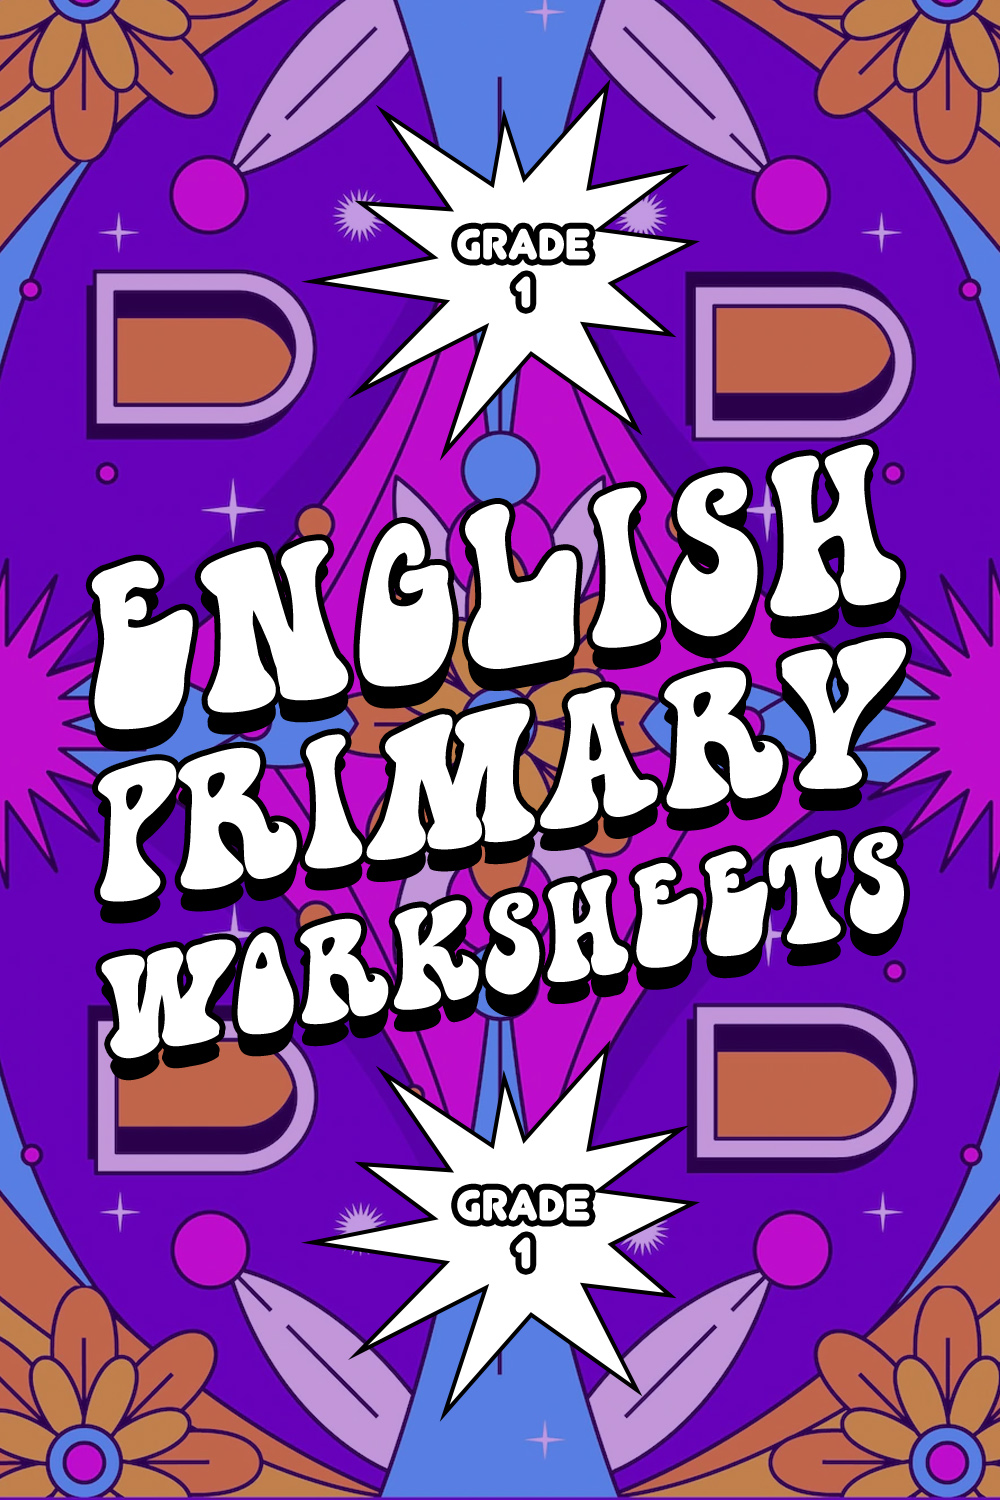 13 Images of English Primary 1 Worksheet